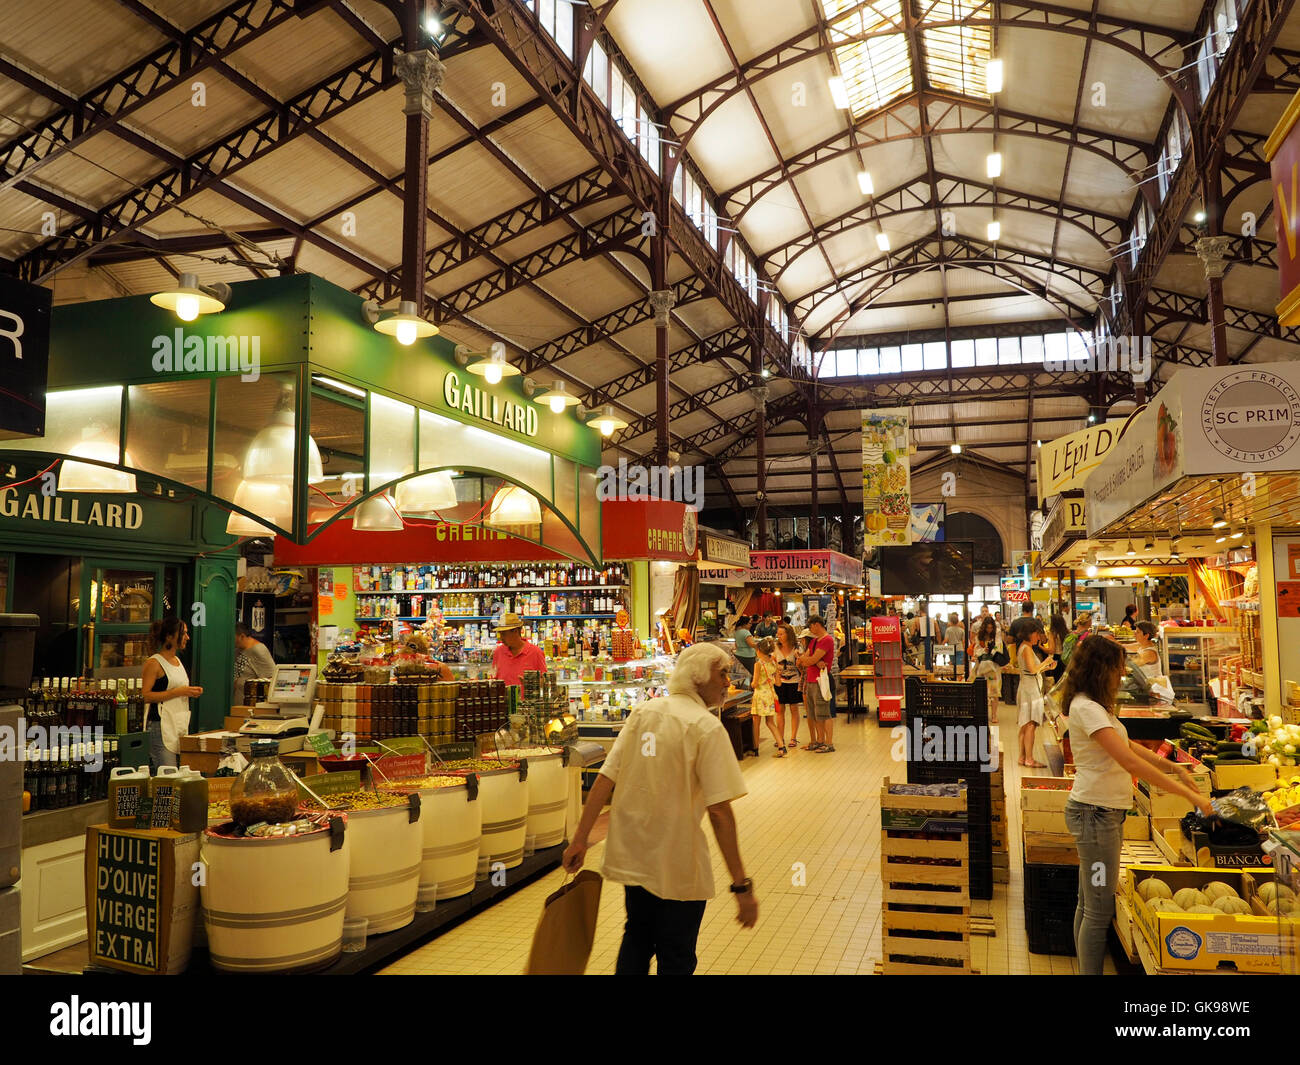 Inside les halles the food market halls in the city center of